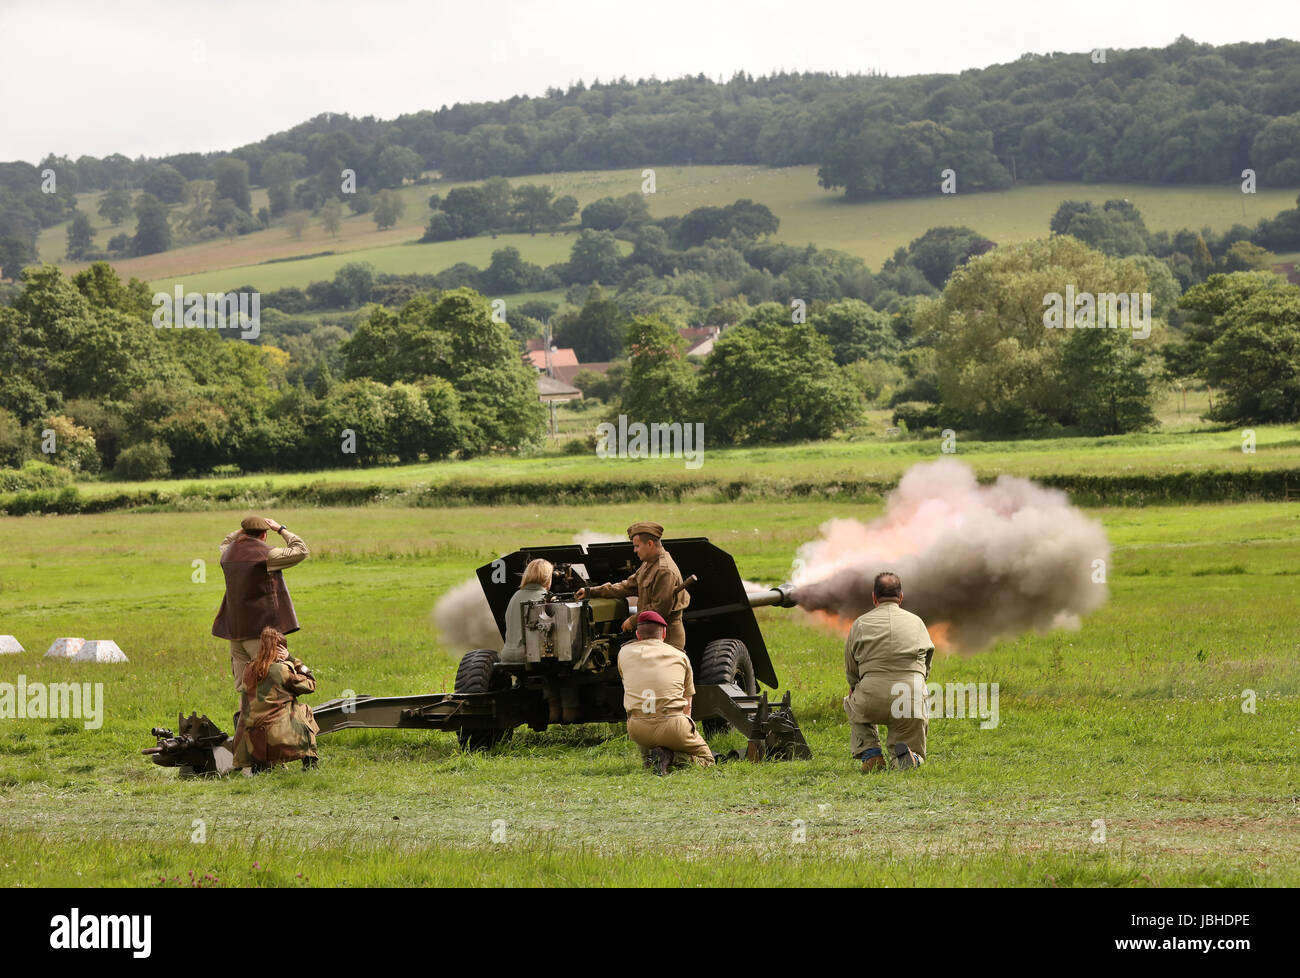 10th June 2017 - War and peace show at Wraxall in North Somerset.England. Stock Photo